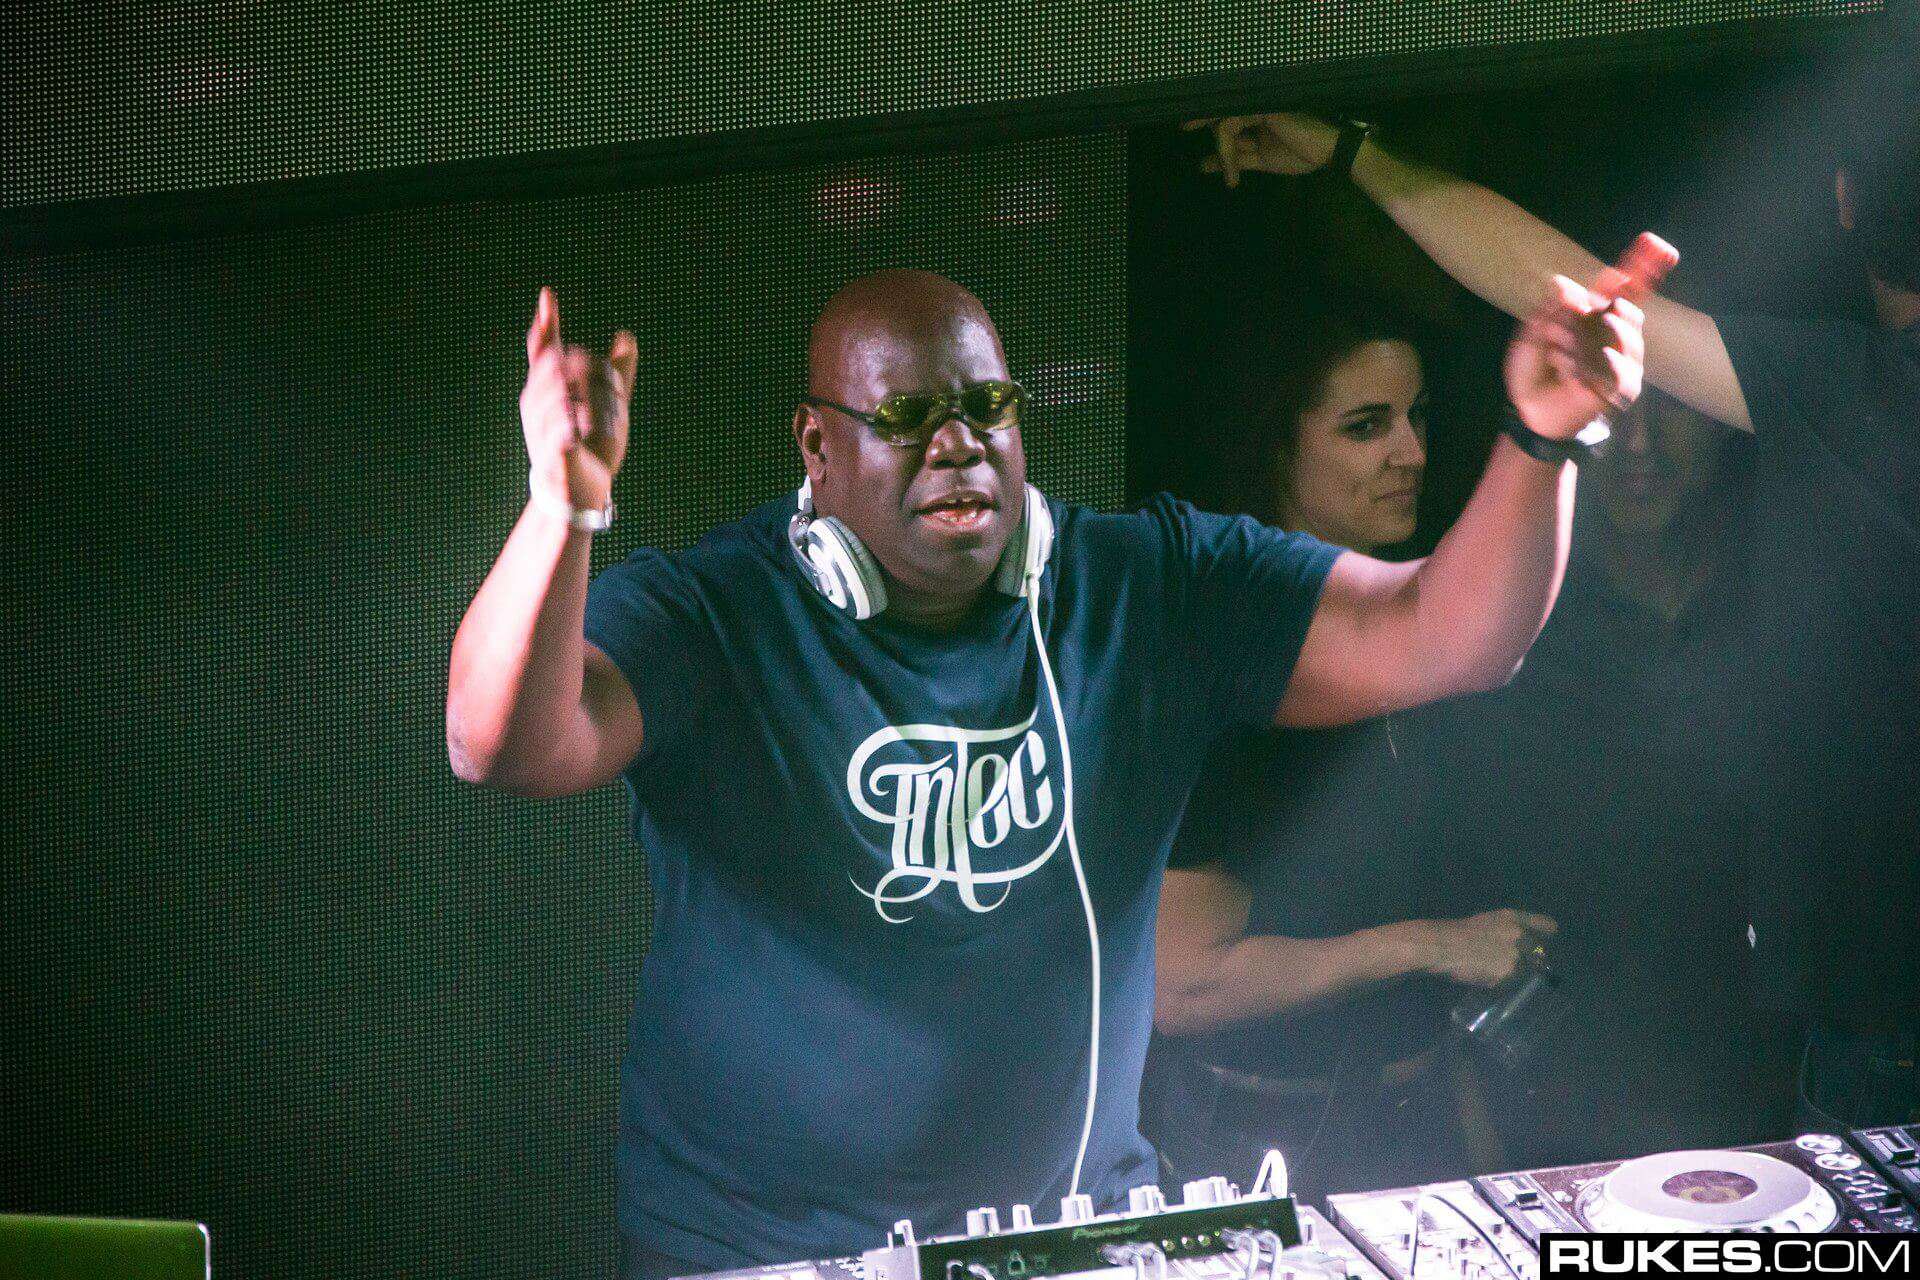 Carl Cox drops new EP ‘Welcome to My World’: Listen